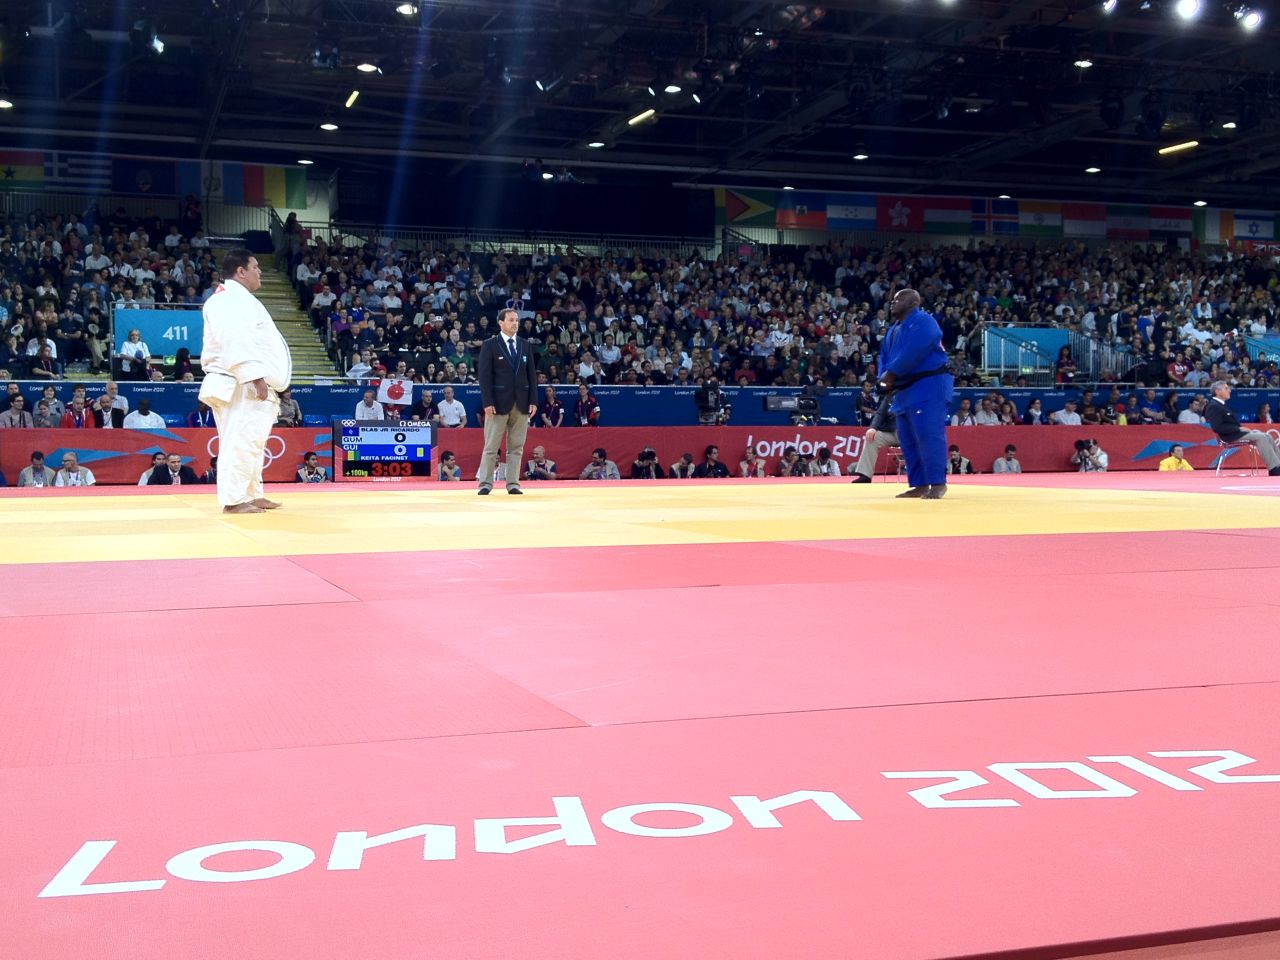 Ricardo Blas Jr. is following in the footsteps of his judokan father, Ricardo Blas, who became Guam's first Olympian in 1988 and is now president of the country's Olympic association. Blas Jr competed in Beijing but was defeated in the first round of the men's +100 kg judo, consequently, the 2012 Games demand progress. As London's heaviest athlete -- at 218kg -- he is a formidable opponent. 